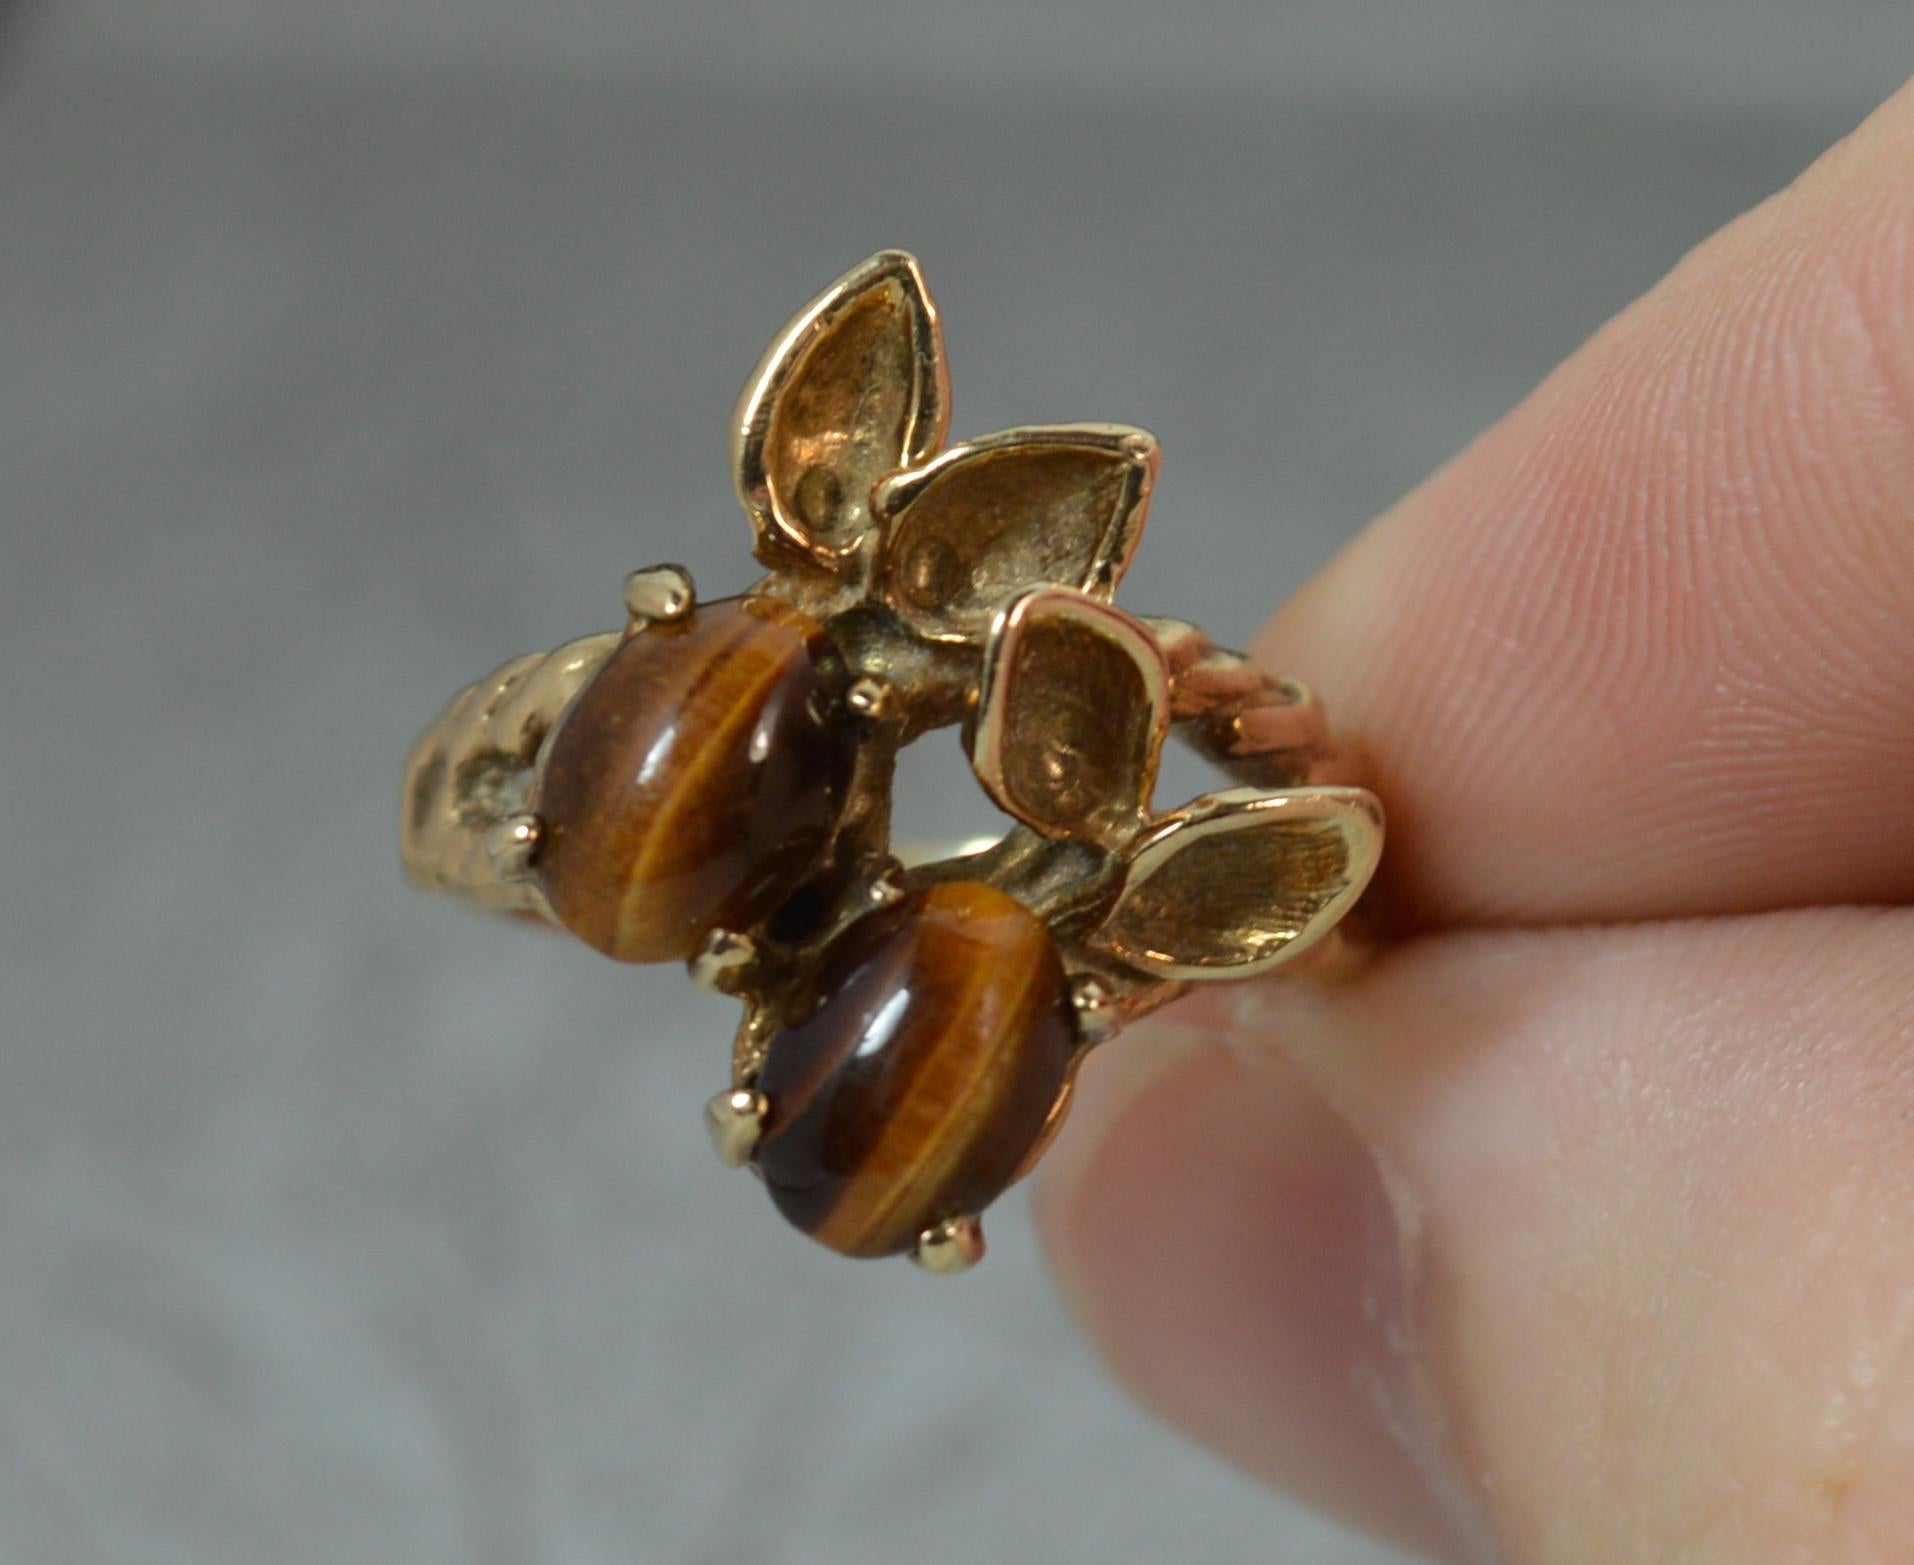 A superb 9 carat gold, tigers eye cluster ring.
​Retro example of natural berry form.
Set with two tiger's eye oval shaped stones with gold leaf design.

CONDITION ; Excellent. Well set stones, good strong claws. Strong band, light wear. Issue free.